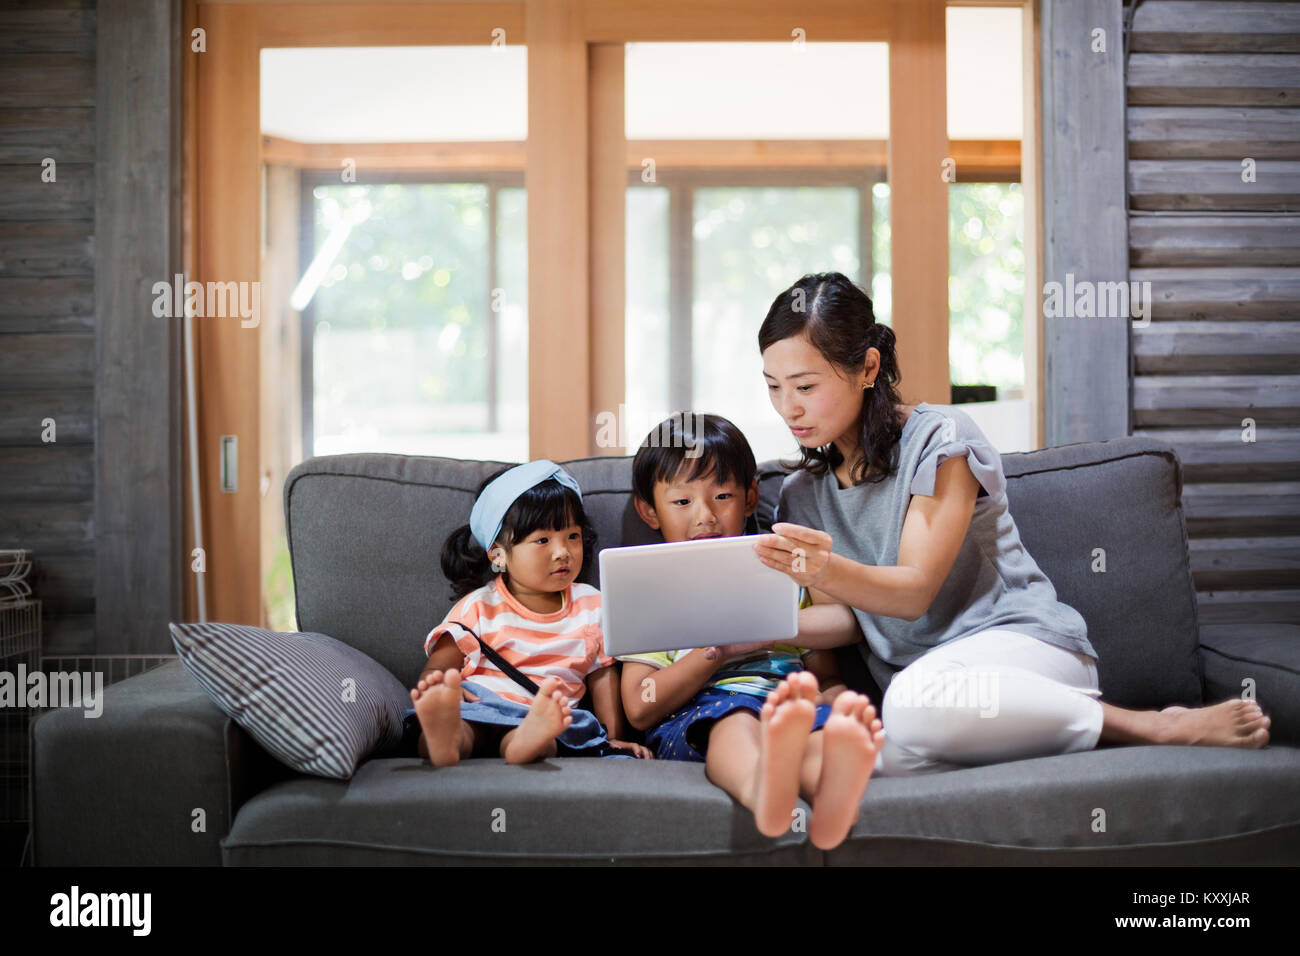 Woman, boy and young girl sitting on a grey sofa, looking at digital tablet. Stock Photo